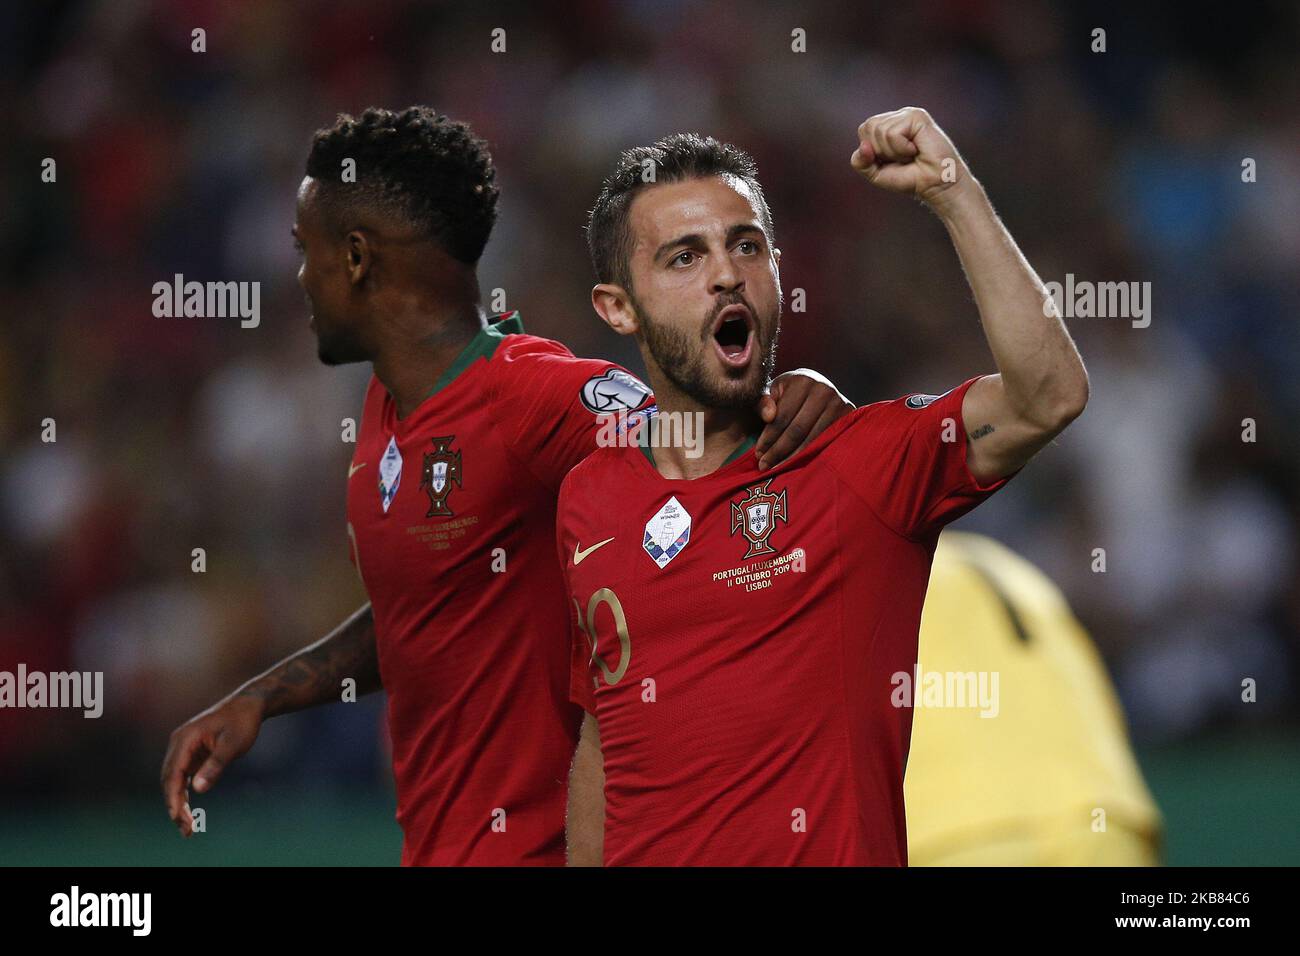 Bernardo Silva of Portugal (R) celebrates his goal with Nelson Semedo of Portugal (L) during the Euro 2020 qualifying match football match between Portugal v Luxembourg, in Lisbon, on October 11, 2019. (Photo by Carlos Palma/NurPhoto) Stock Photo